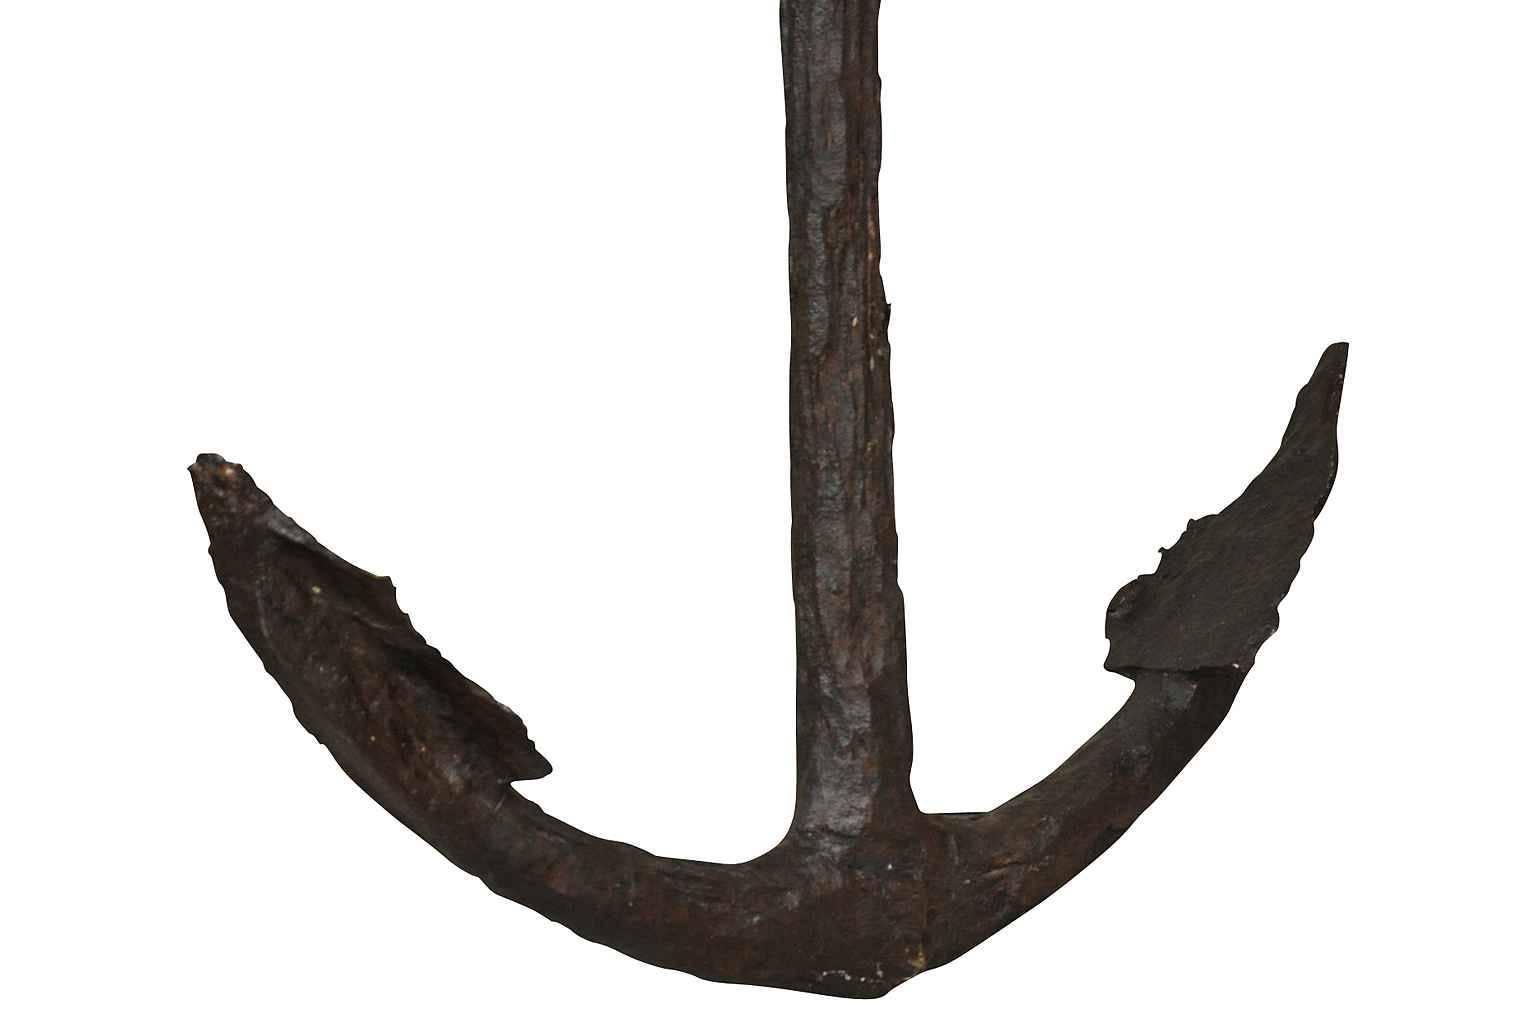 An outstanding and large French 18th century anchor found in the Mediterranean Sea off the coast of Nice, France. Beautifully hand-forged iron. Fabulous patina. Wonderful as a wall-mounted art piece or as a poolside or beach house accent.